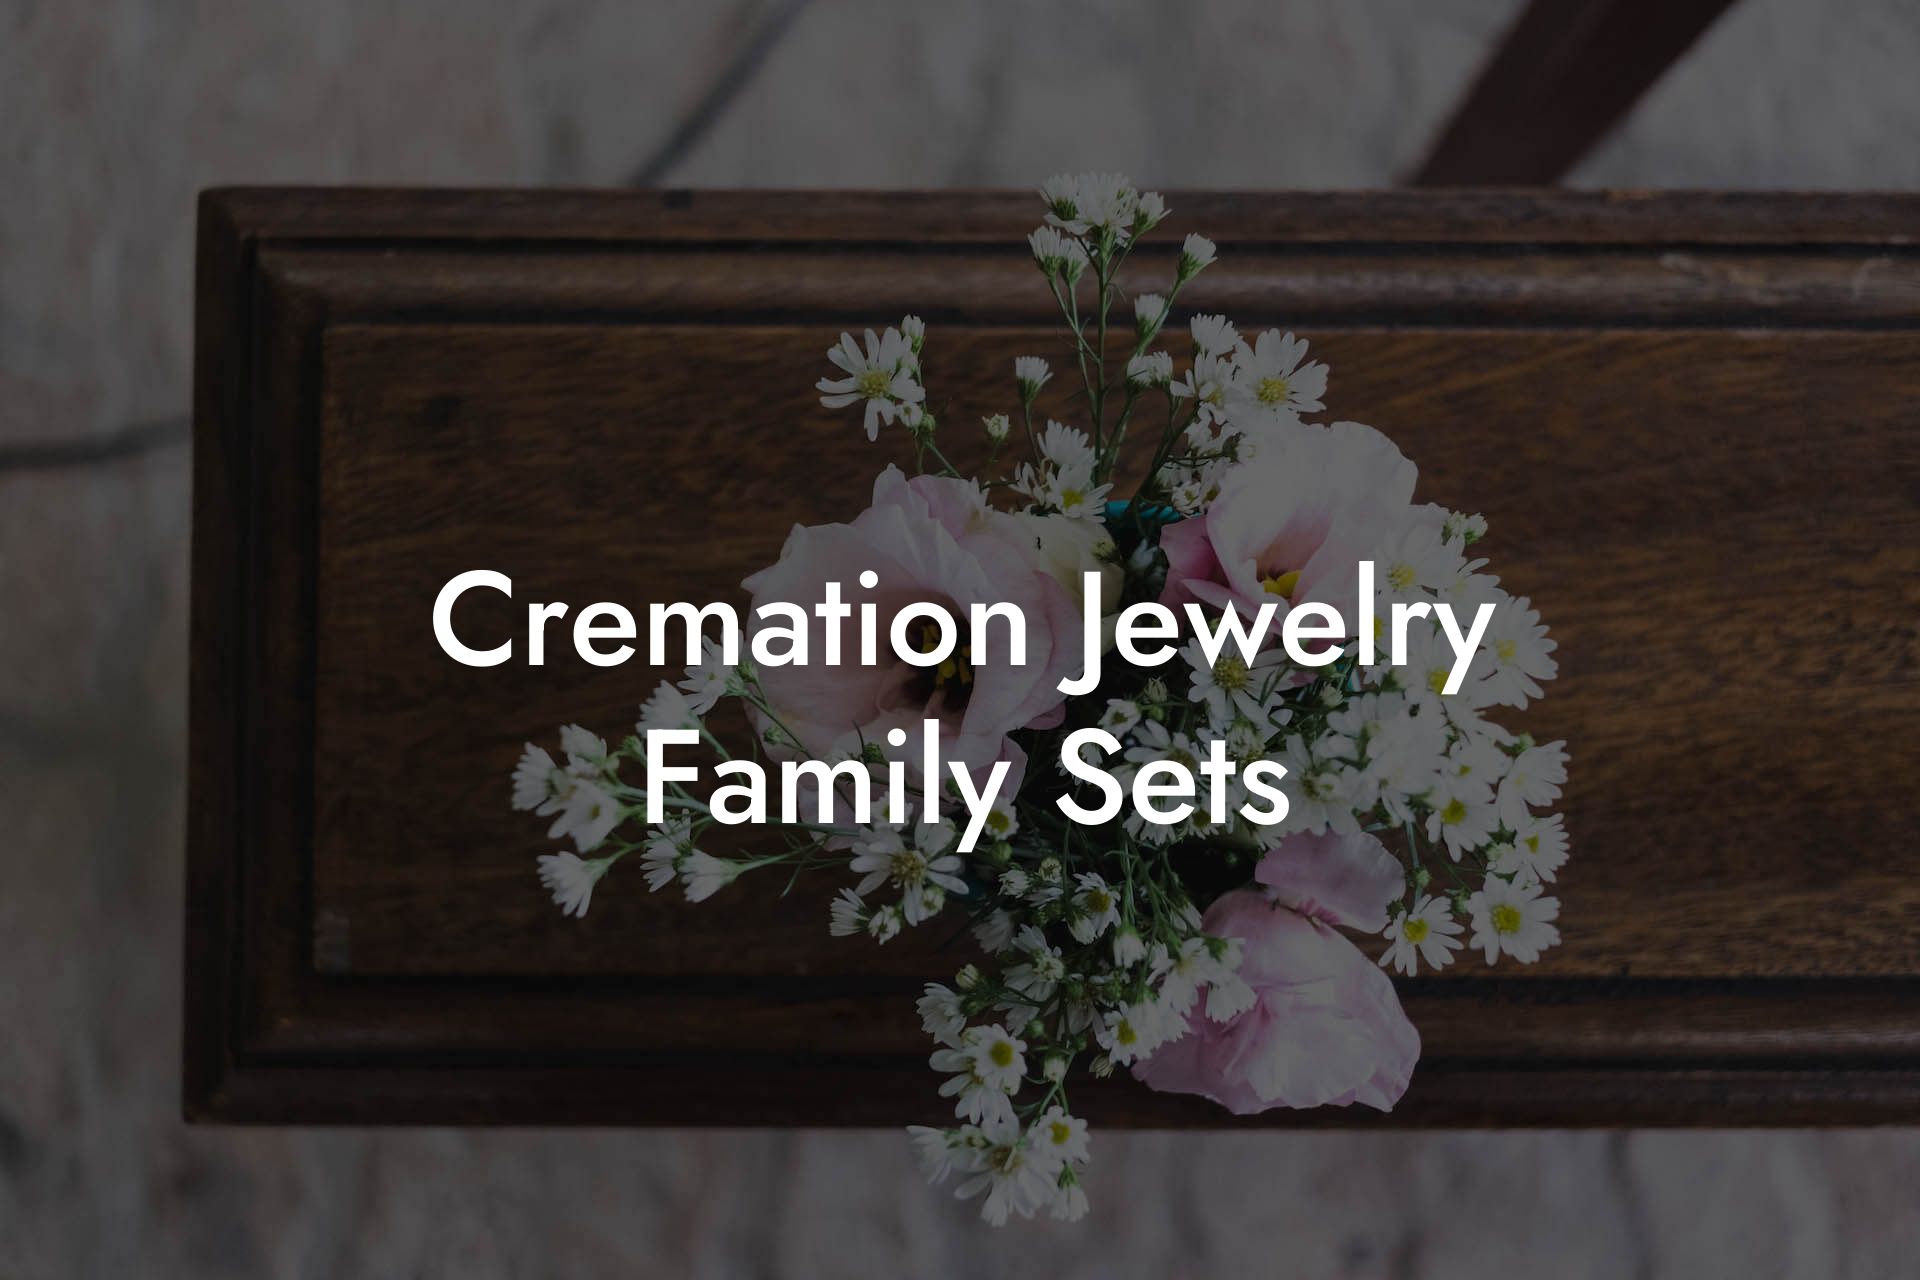 Cremation Jewelry Family Sets